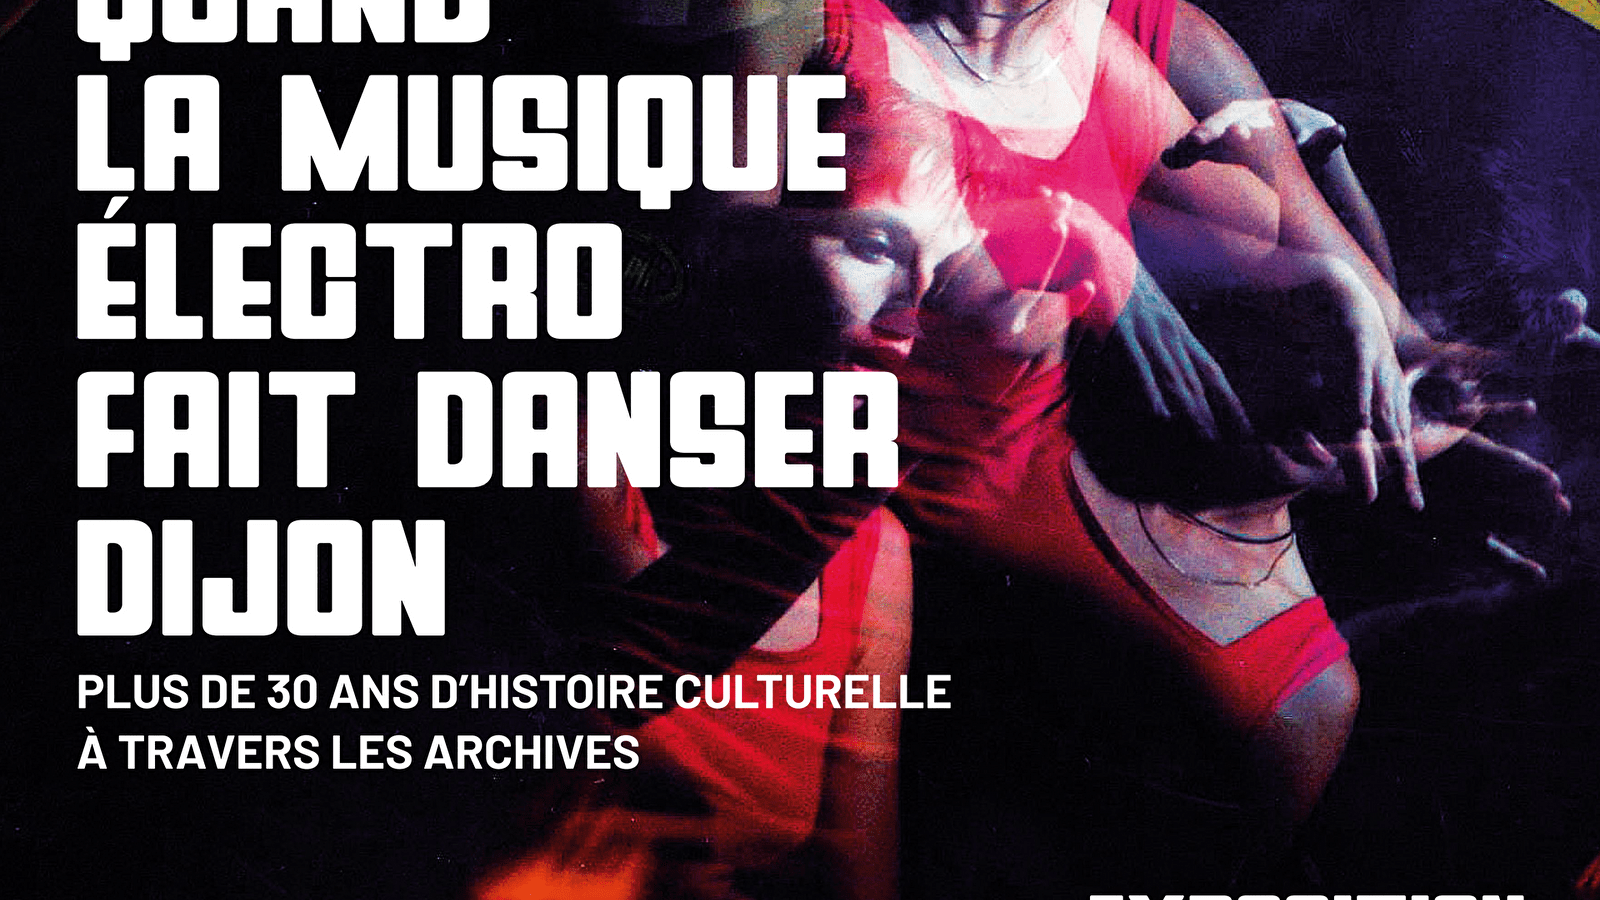 When electro music made Dijon dance, over 30 years of cultural history through the archives
